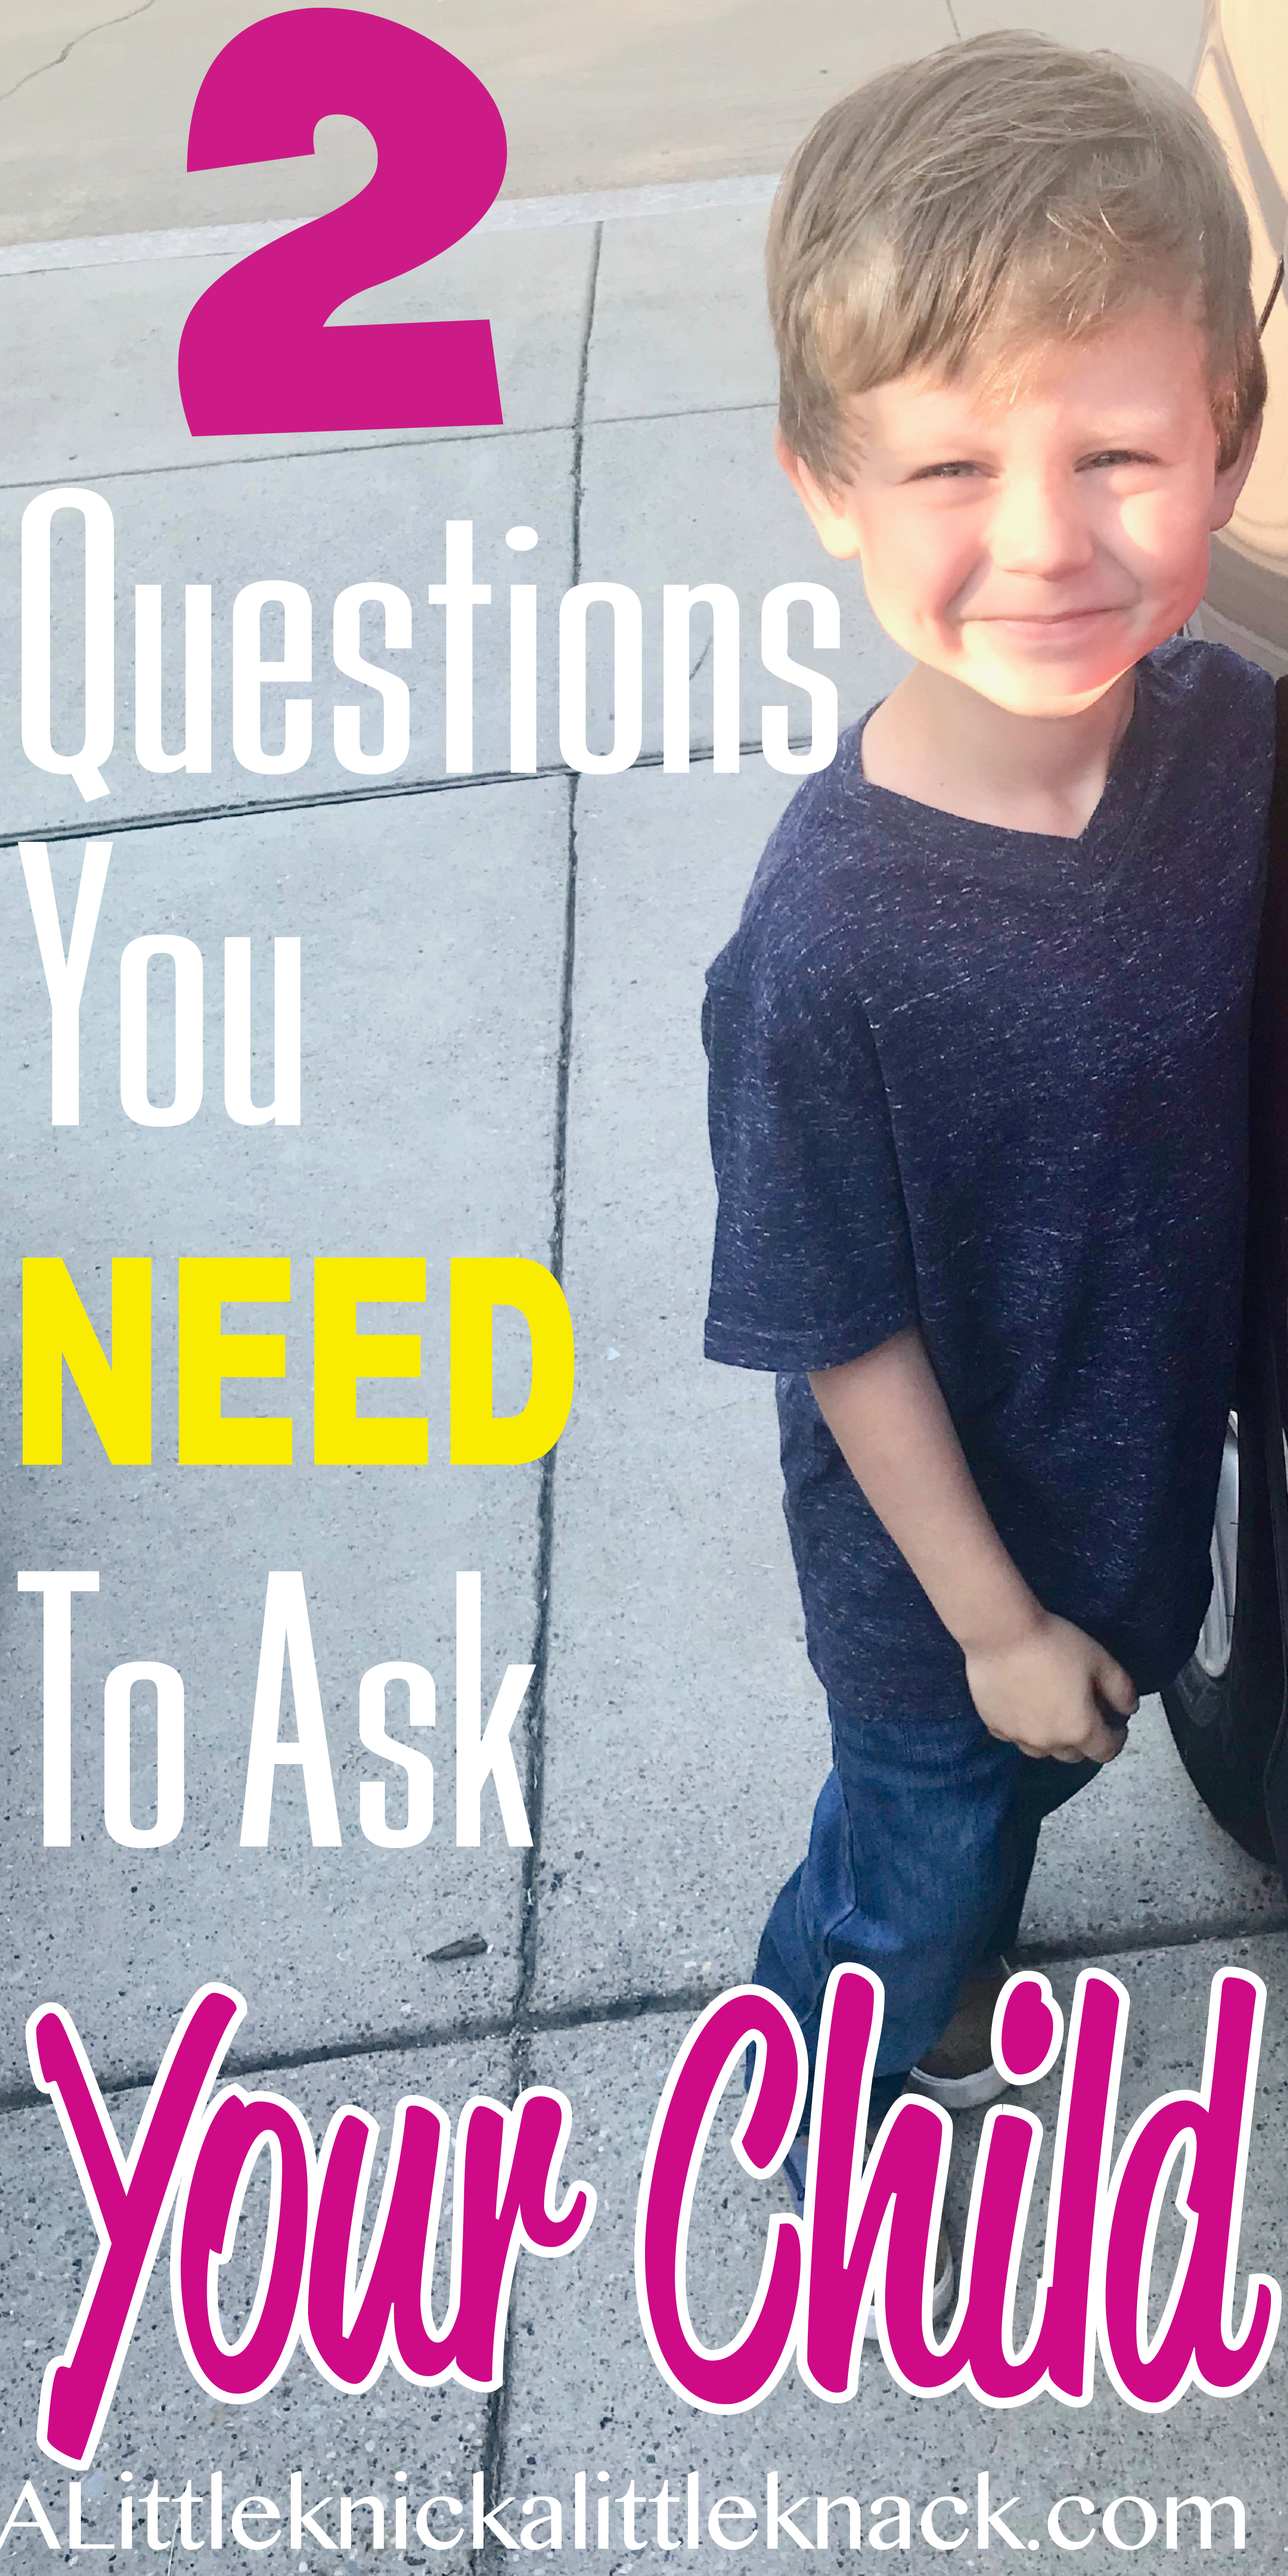 Positive Parenting at it's best! The Two Questions you need to ask your child as a way to teach effective communication skills and build trust.